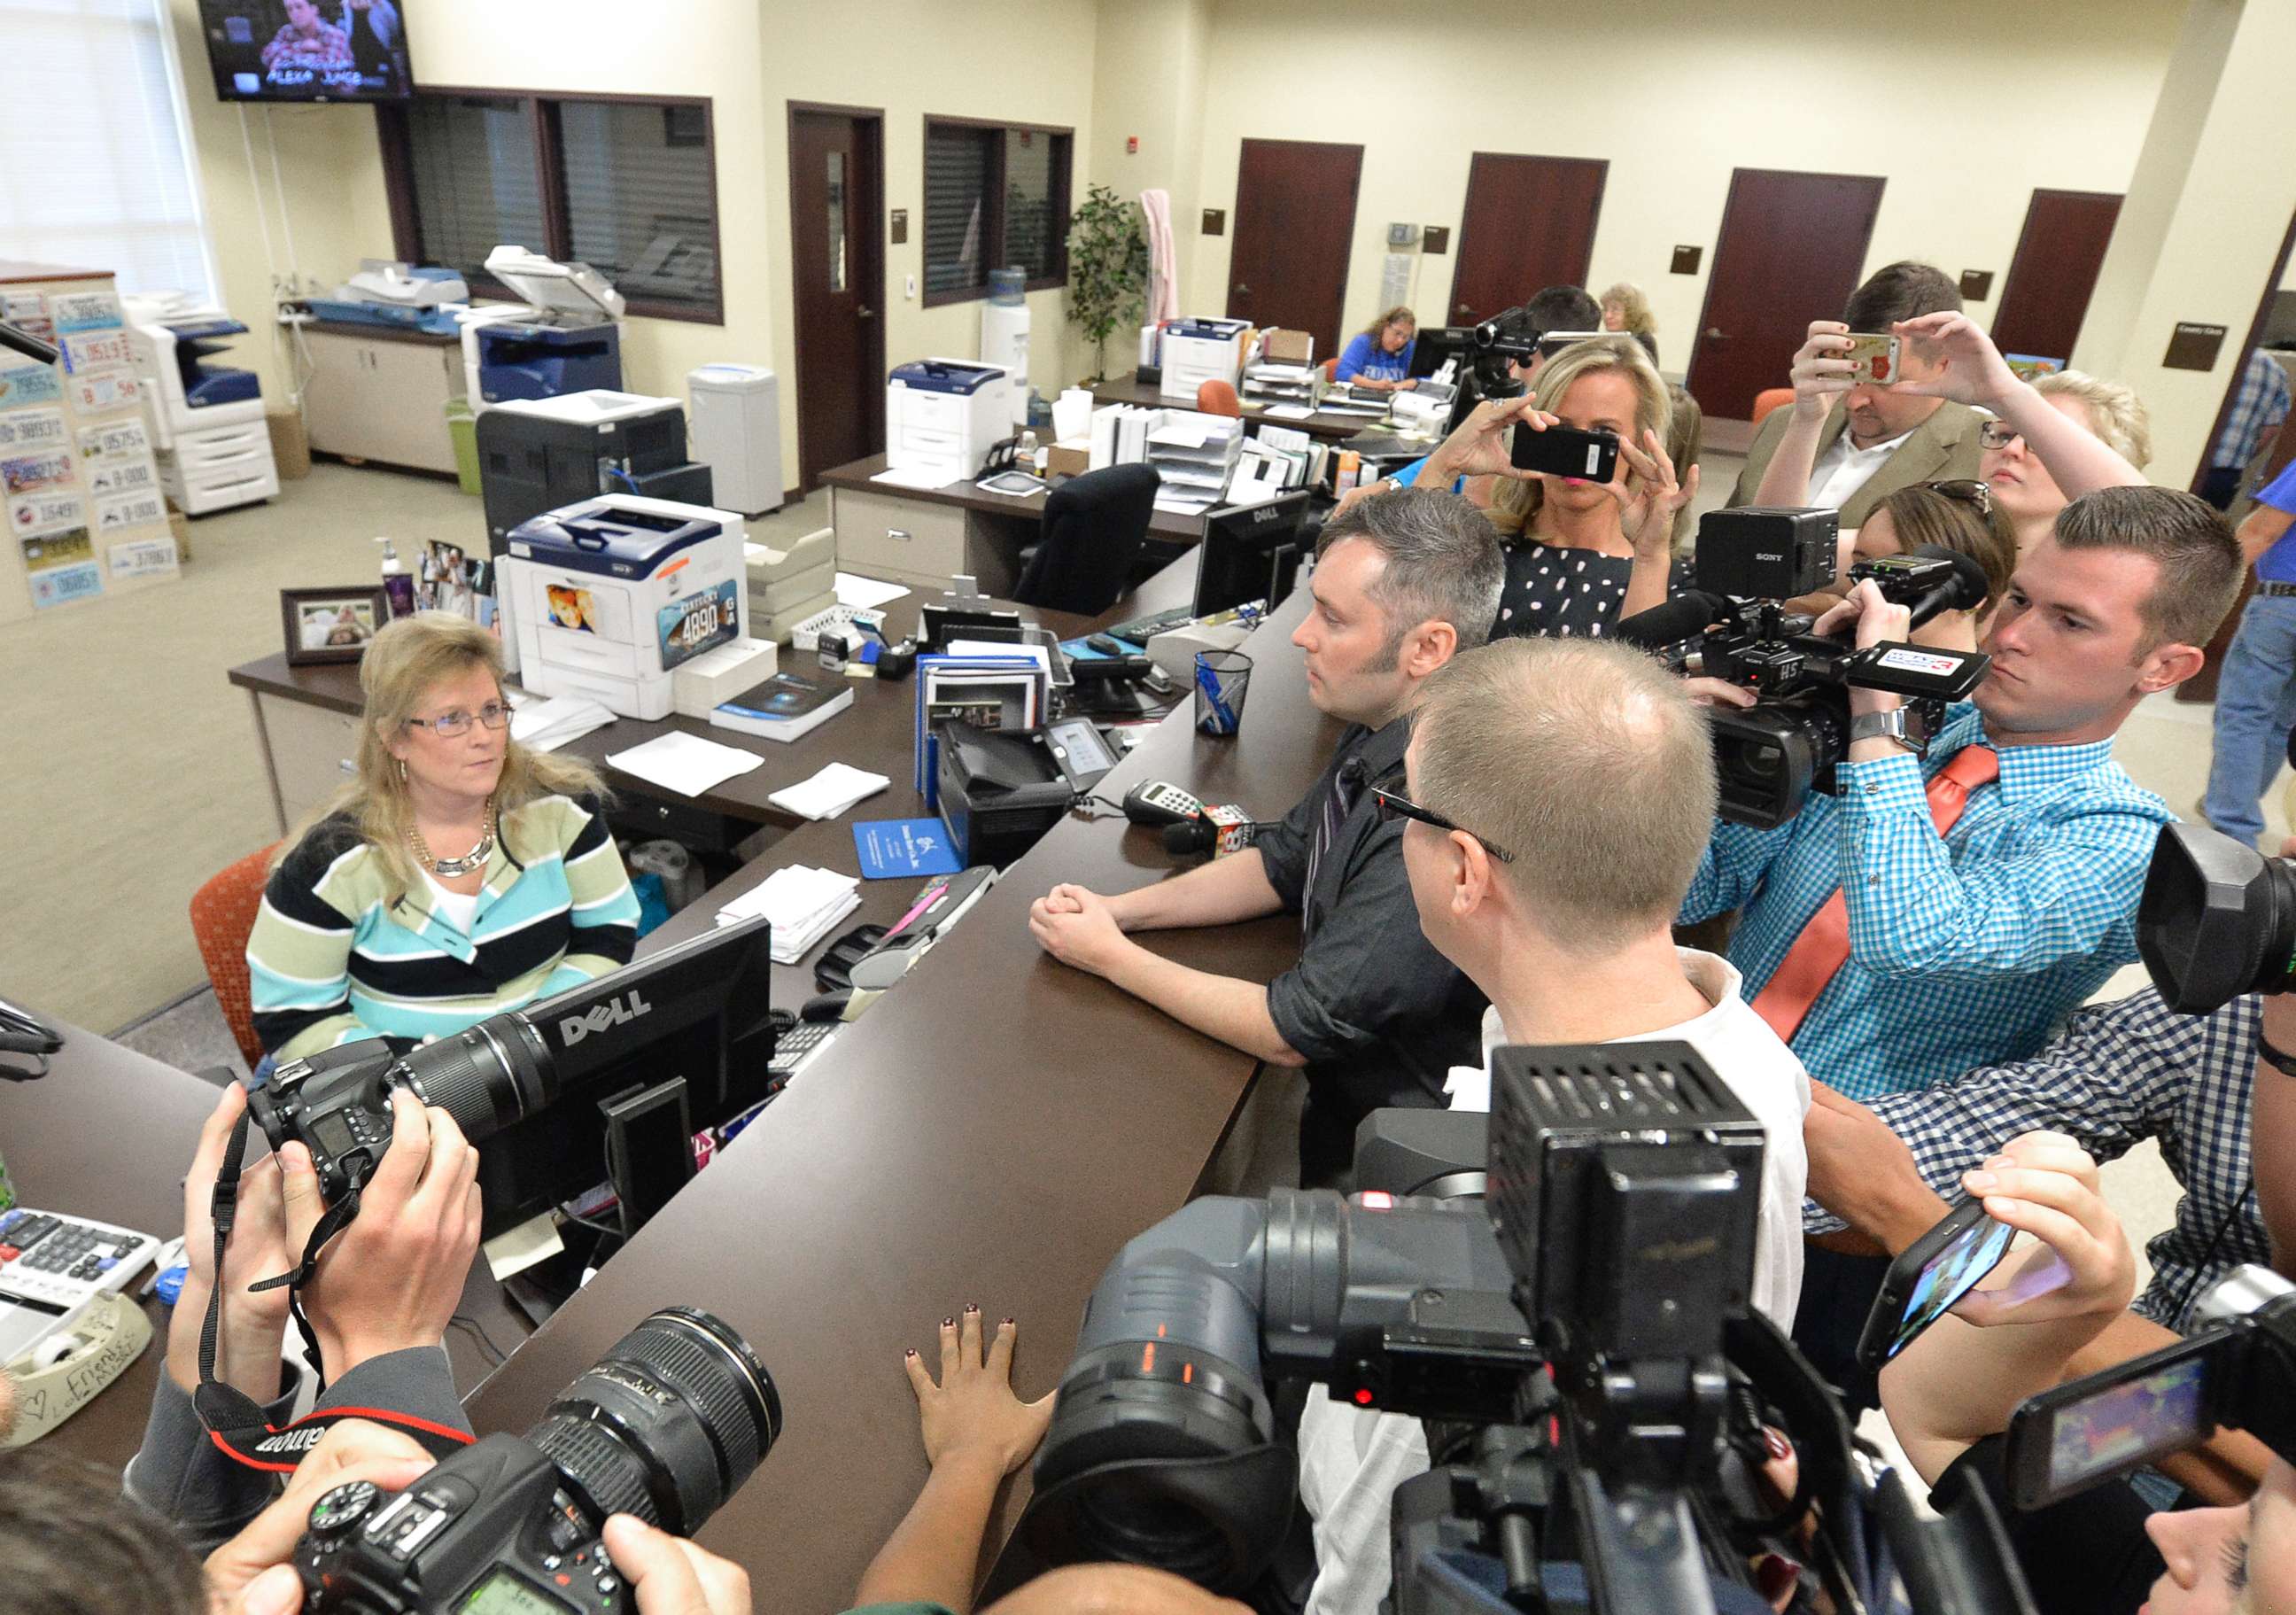 PHOTO: David Moore, center, and his partner David Ermold attempt to apply for a marriage license at the Rowan County Courthouse in Morehead, Ky., Sept. 1, 2015.